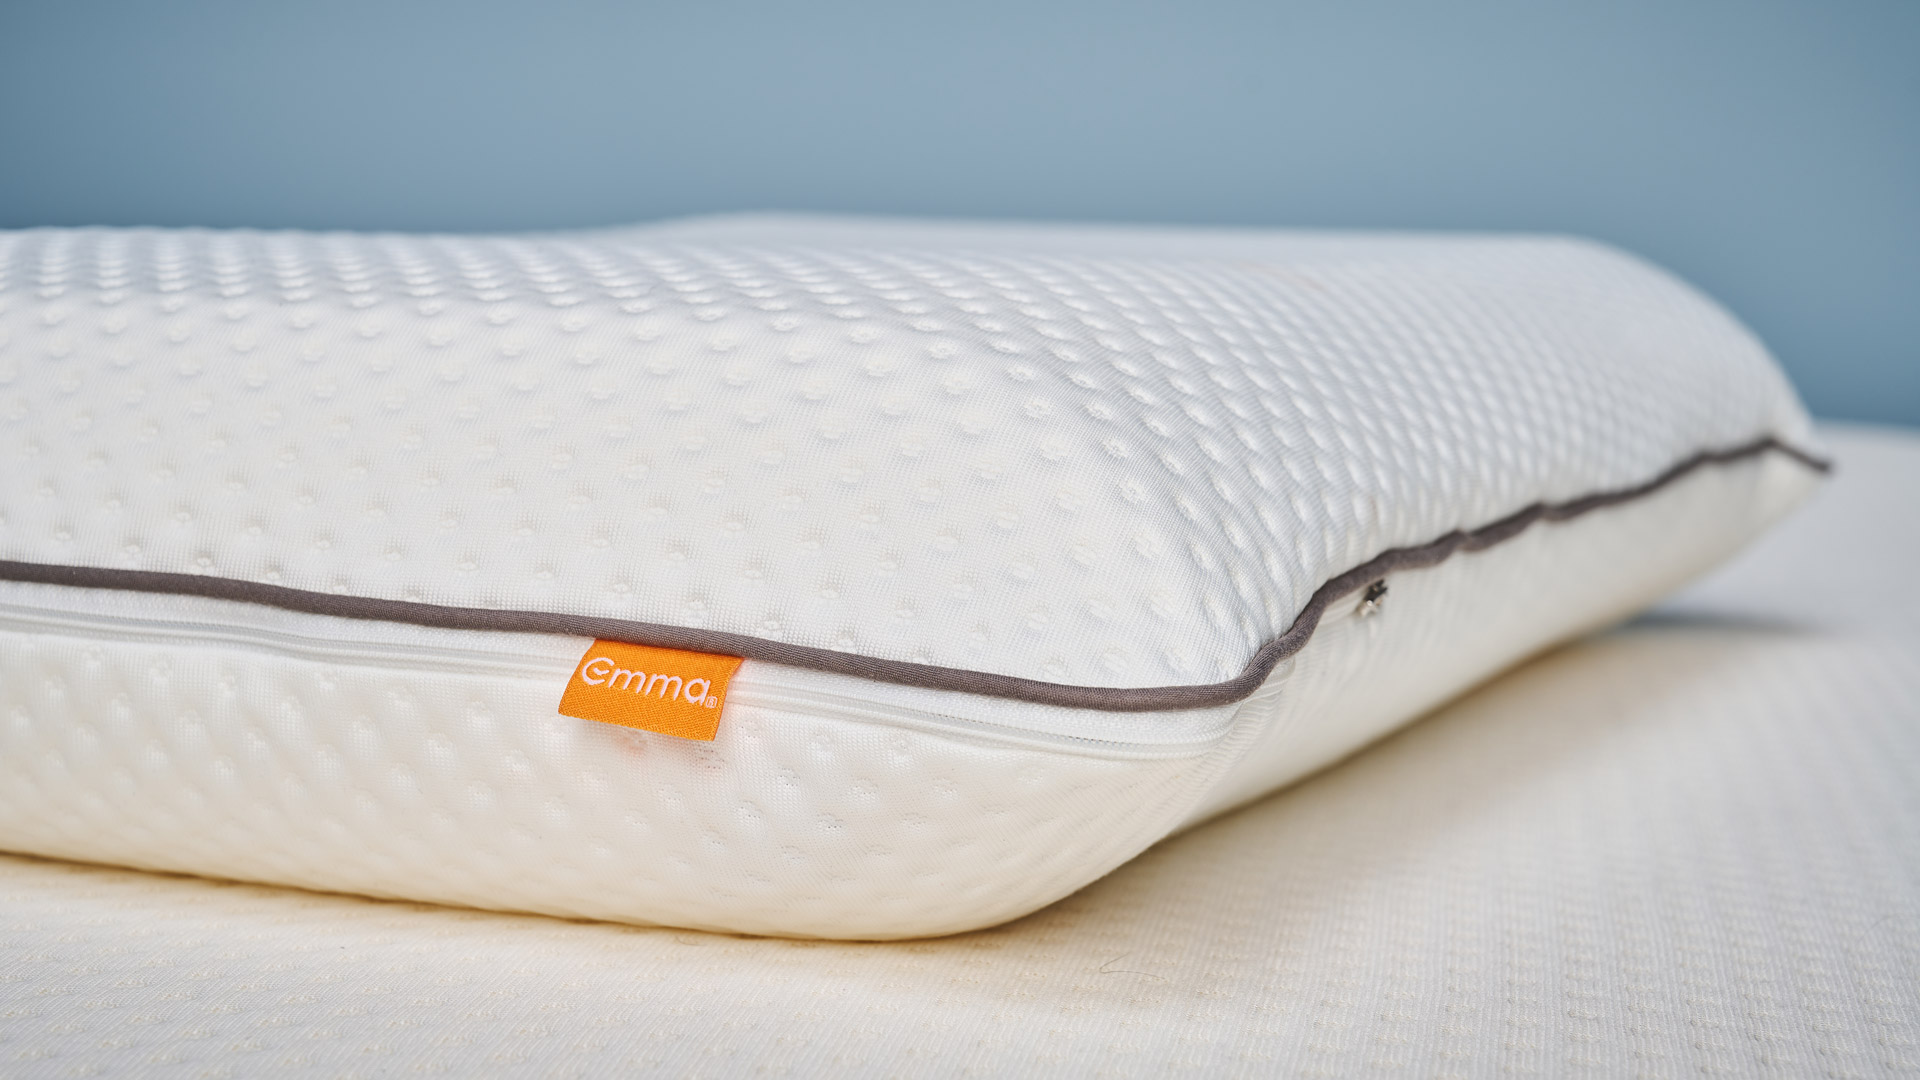 The Emma Original Pillow showing the Emma label